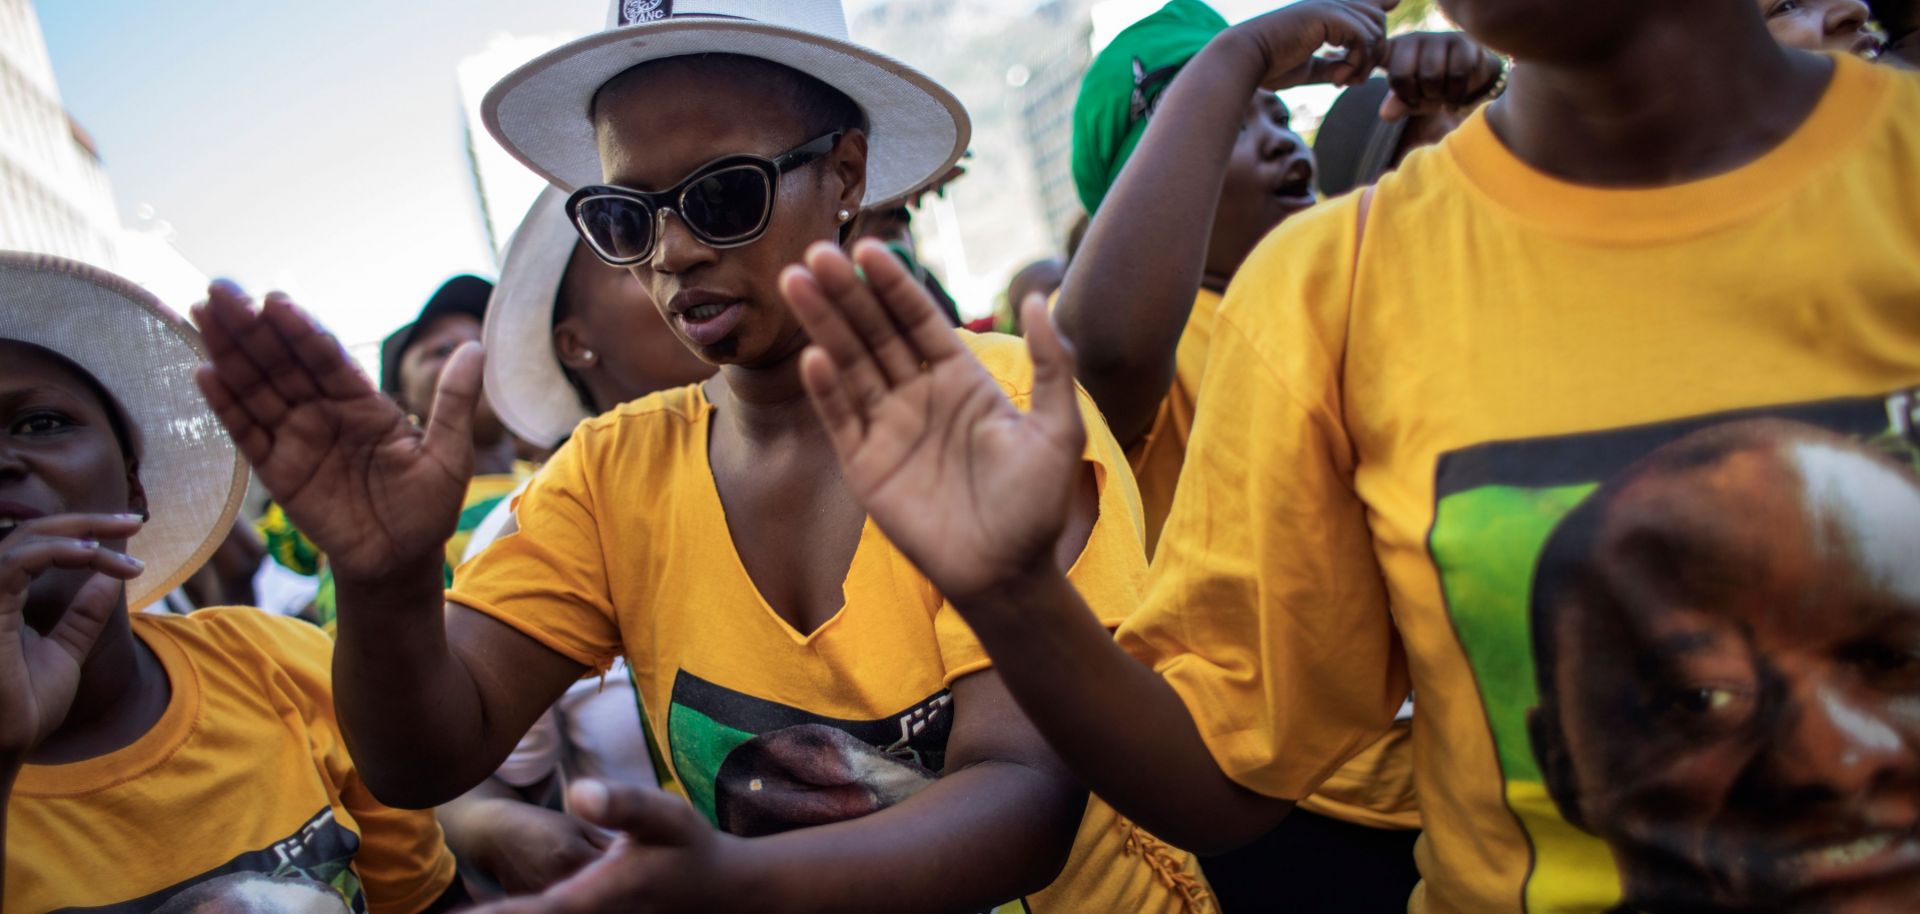 Supporters of South African President Cyril Ramphosa and his African National Congress party at a rally